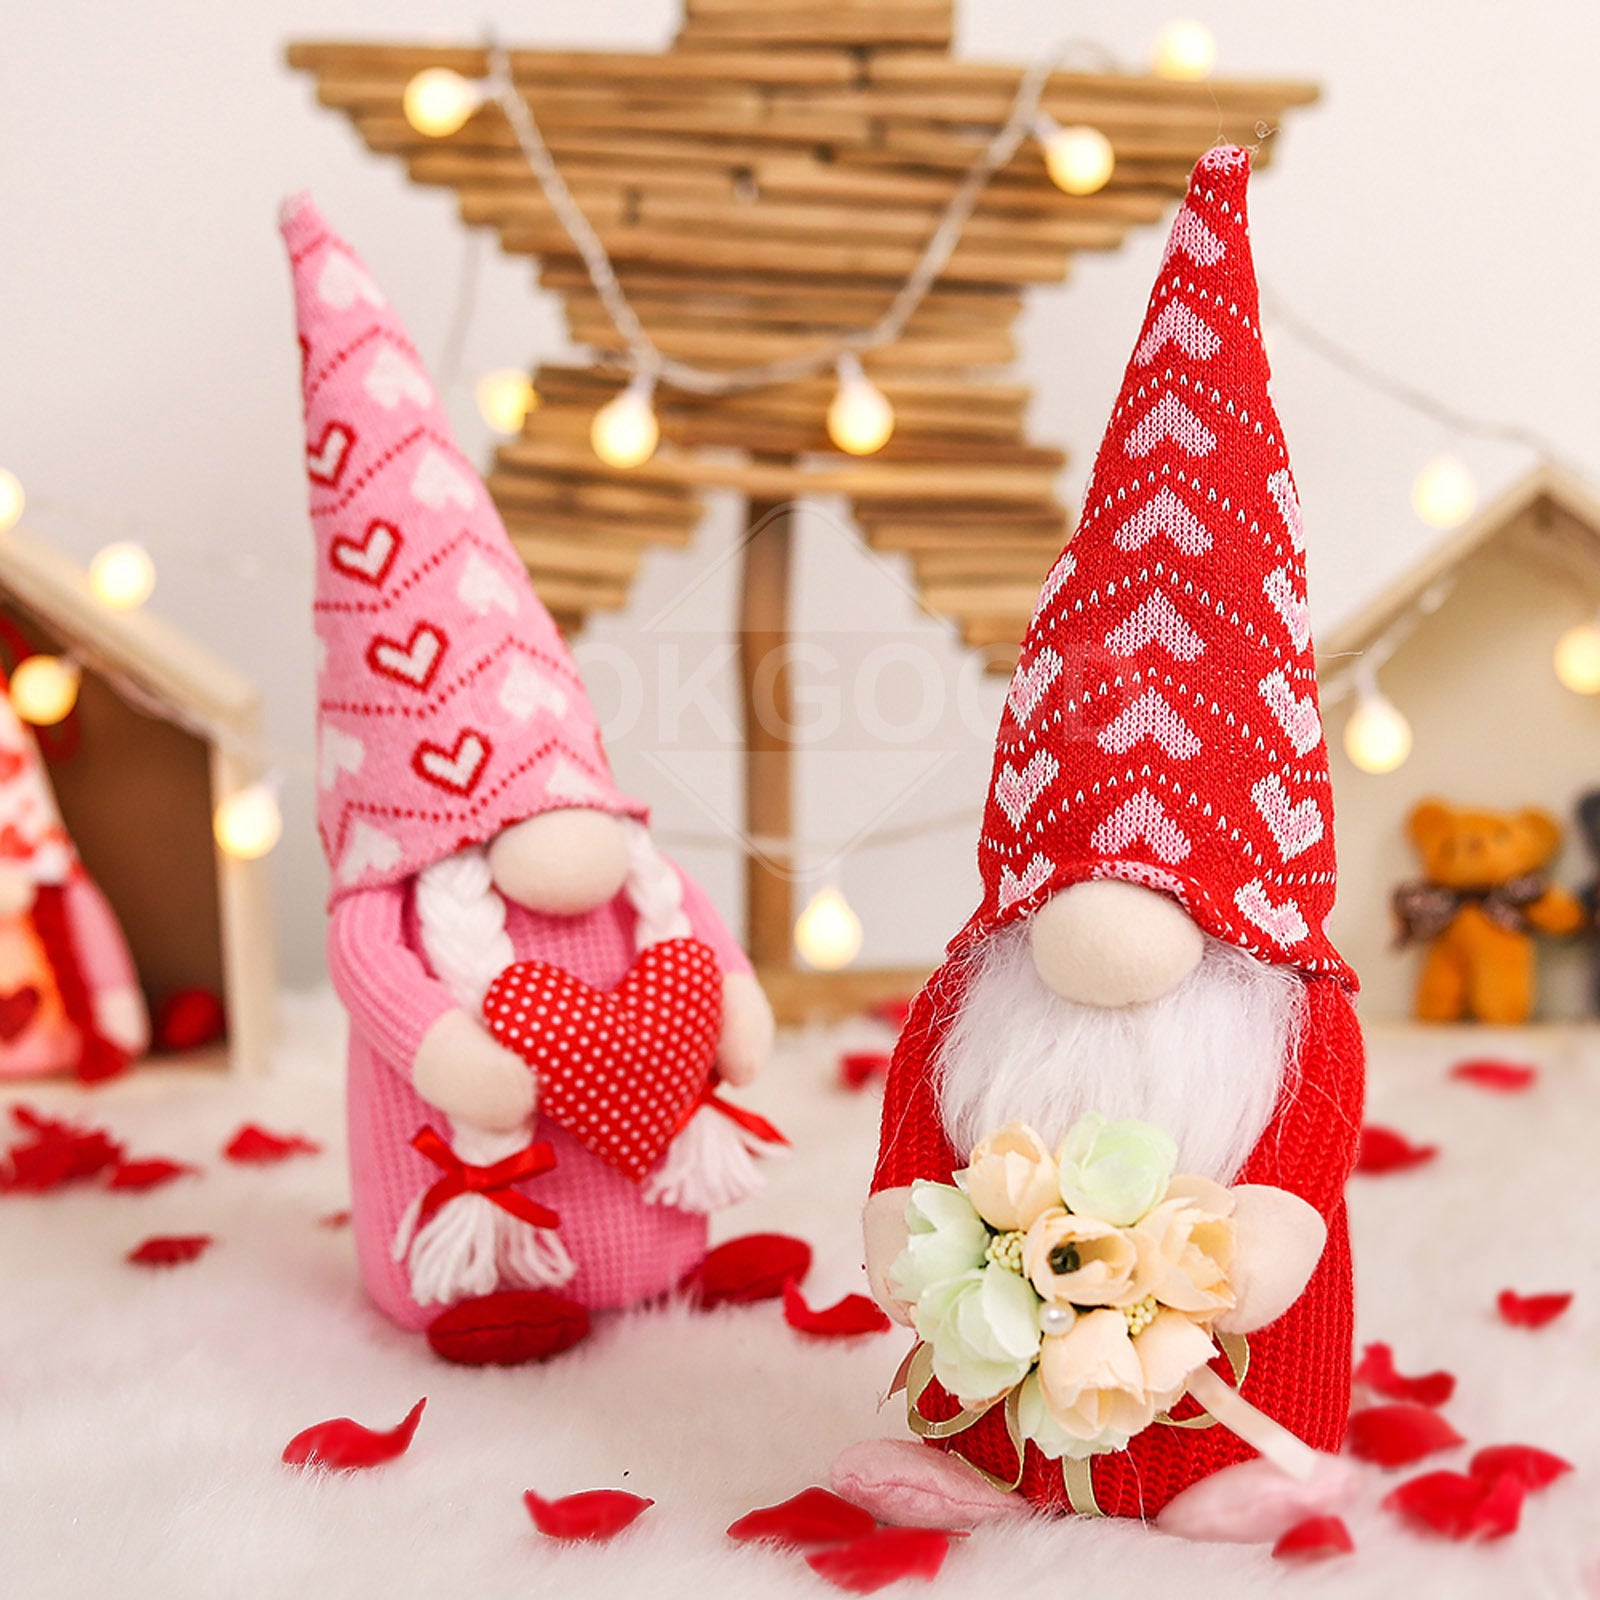 Forever Love - Adorable Gnome Couple Holding Tulip And Heart